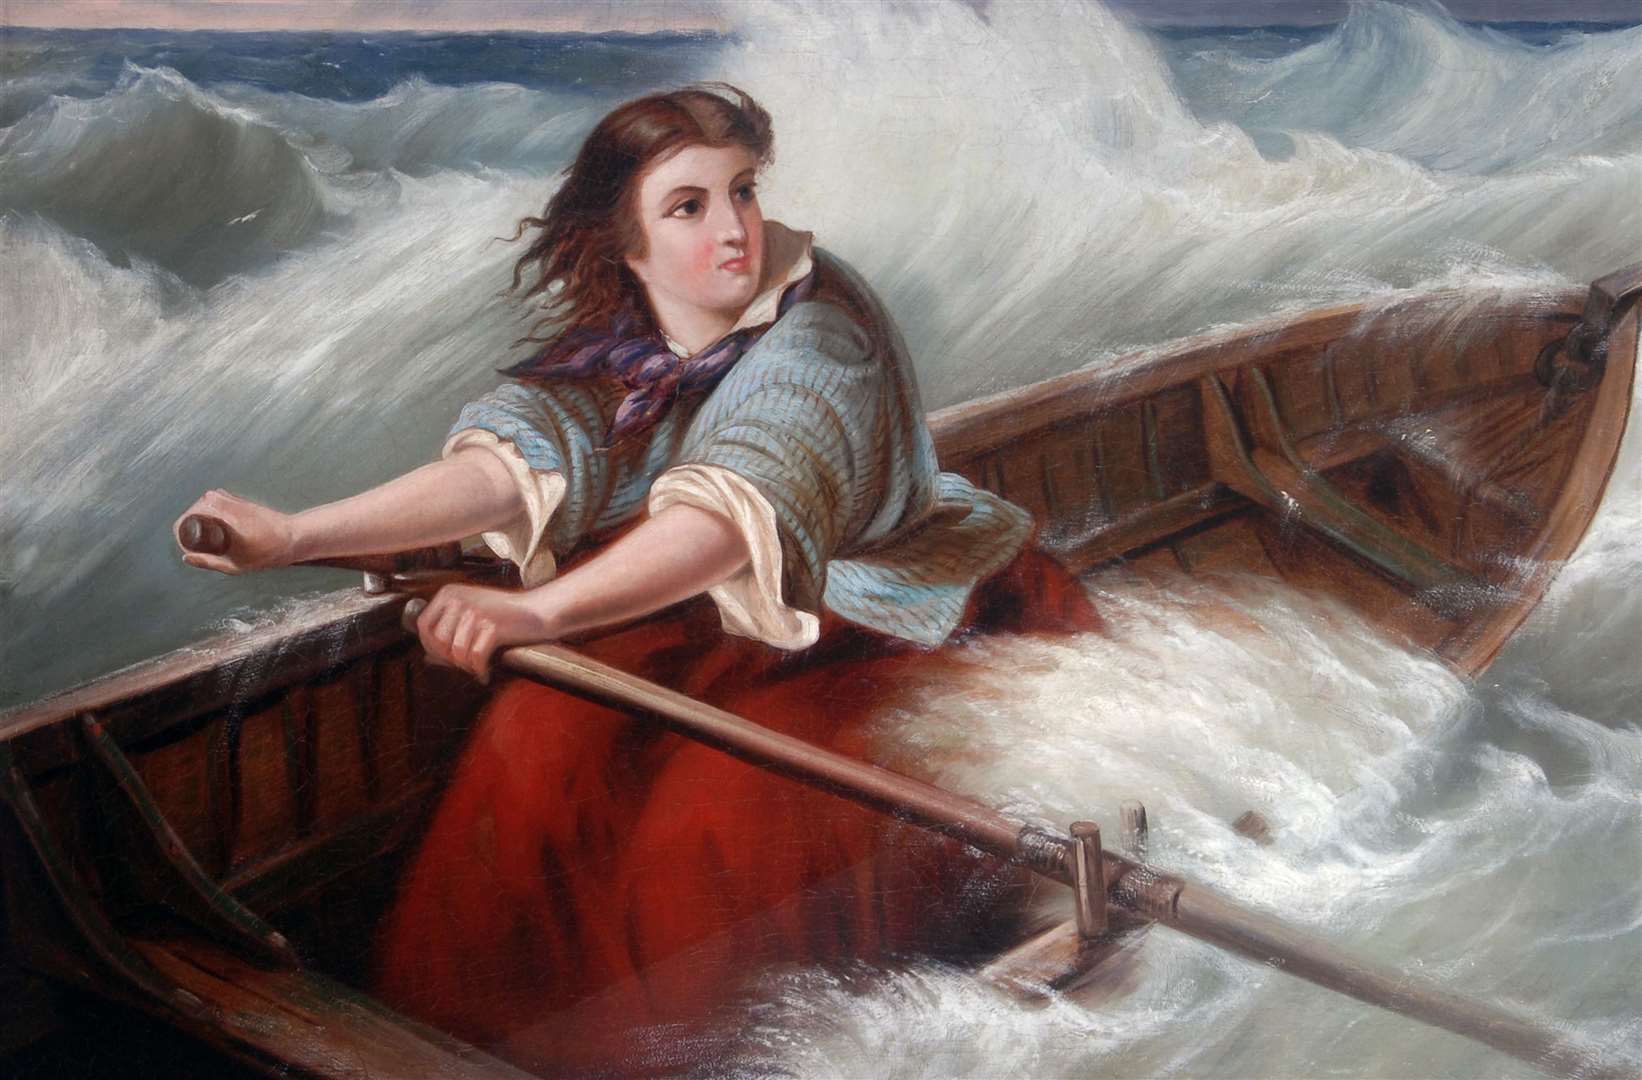 Grace Darling, the daughter of a lighthouse keeper, became a national heroine after risking her life along with her father to save the stranded survivors of a wrecked steamship in 1838. Image: RNLI.